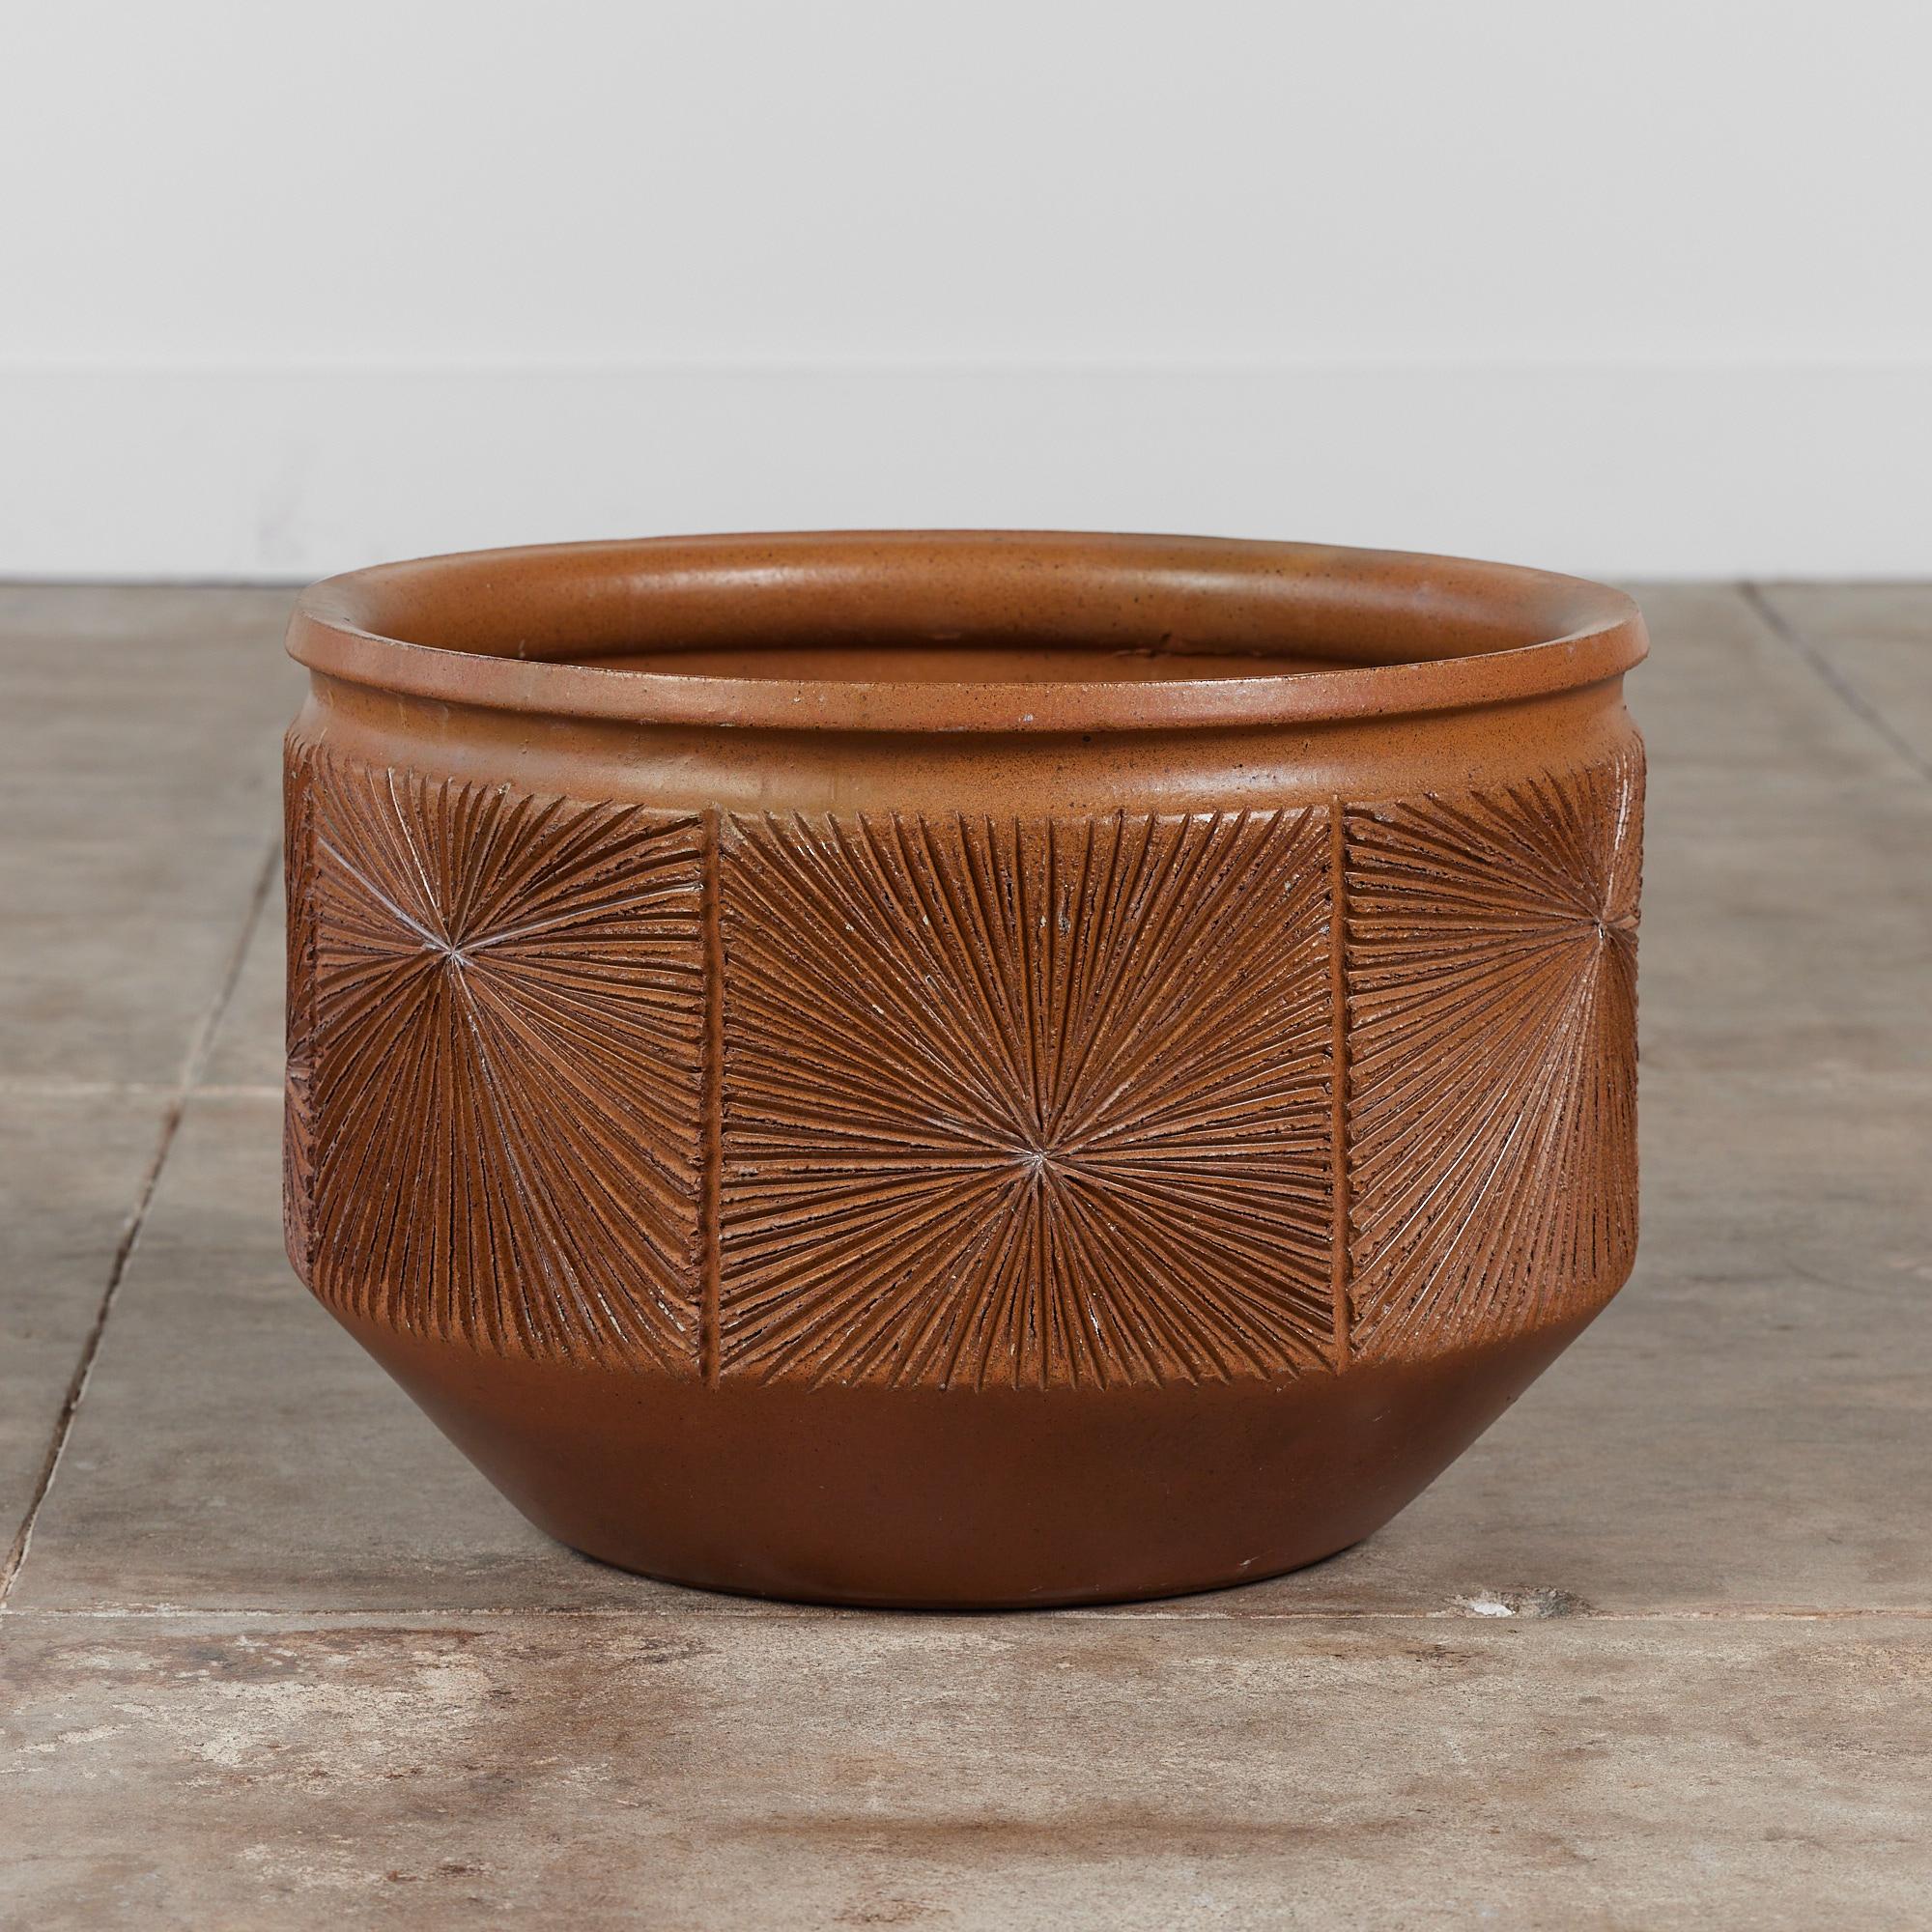 Hand thrown stoneware planter from Earthgender, David Cressey and Robert Maxwell’s early 1970s project. This 18” diameter example is incised in the “Sunburst” design a pattern of lines radiating from a central point. The interior and exterior of the